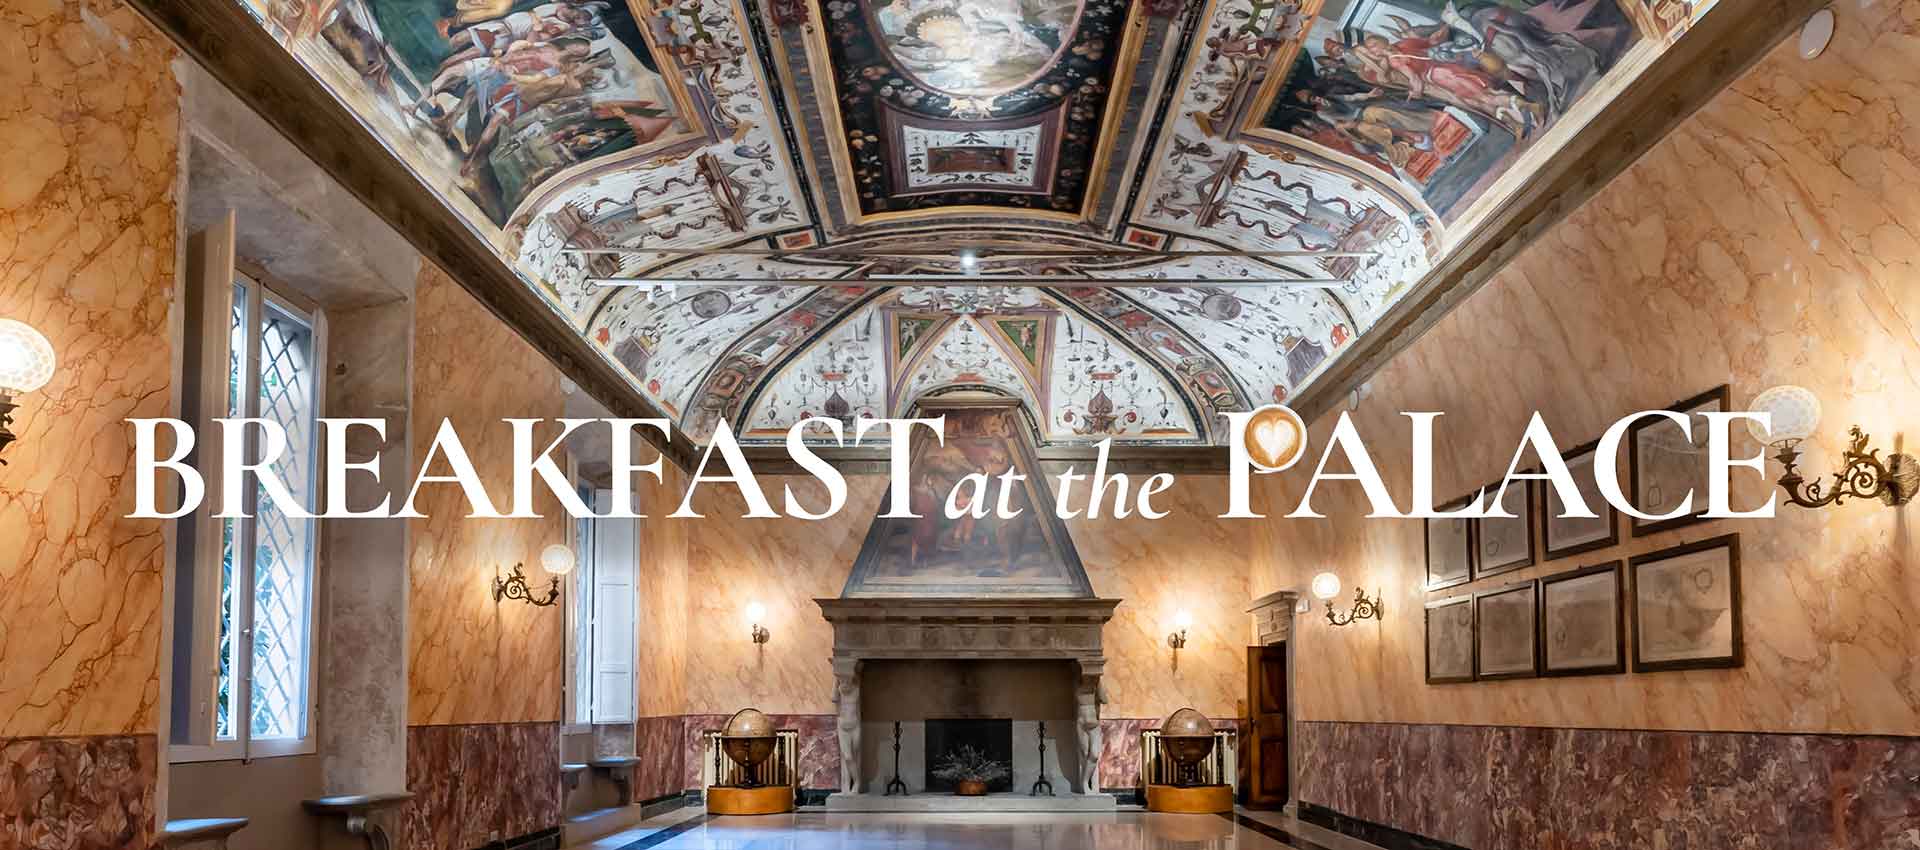 <p>Every Saturday in December 2023, from 10 a.m. to 1 p.m.</p>
<h2>Breakfast at the Palace</h2>
<h3>What could be better than starting the day in beauty in a Renaissance palace? </h3>
